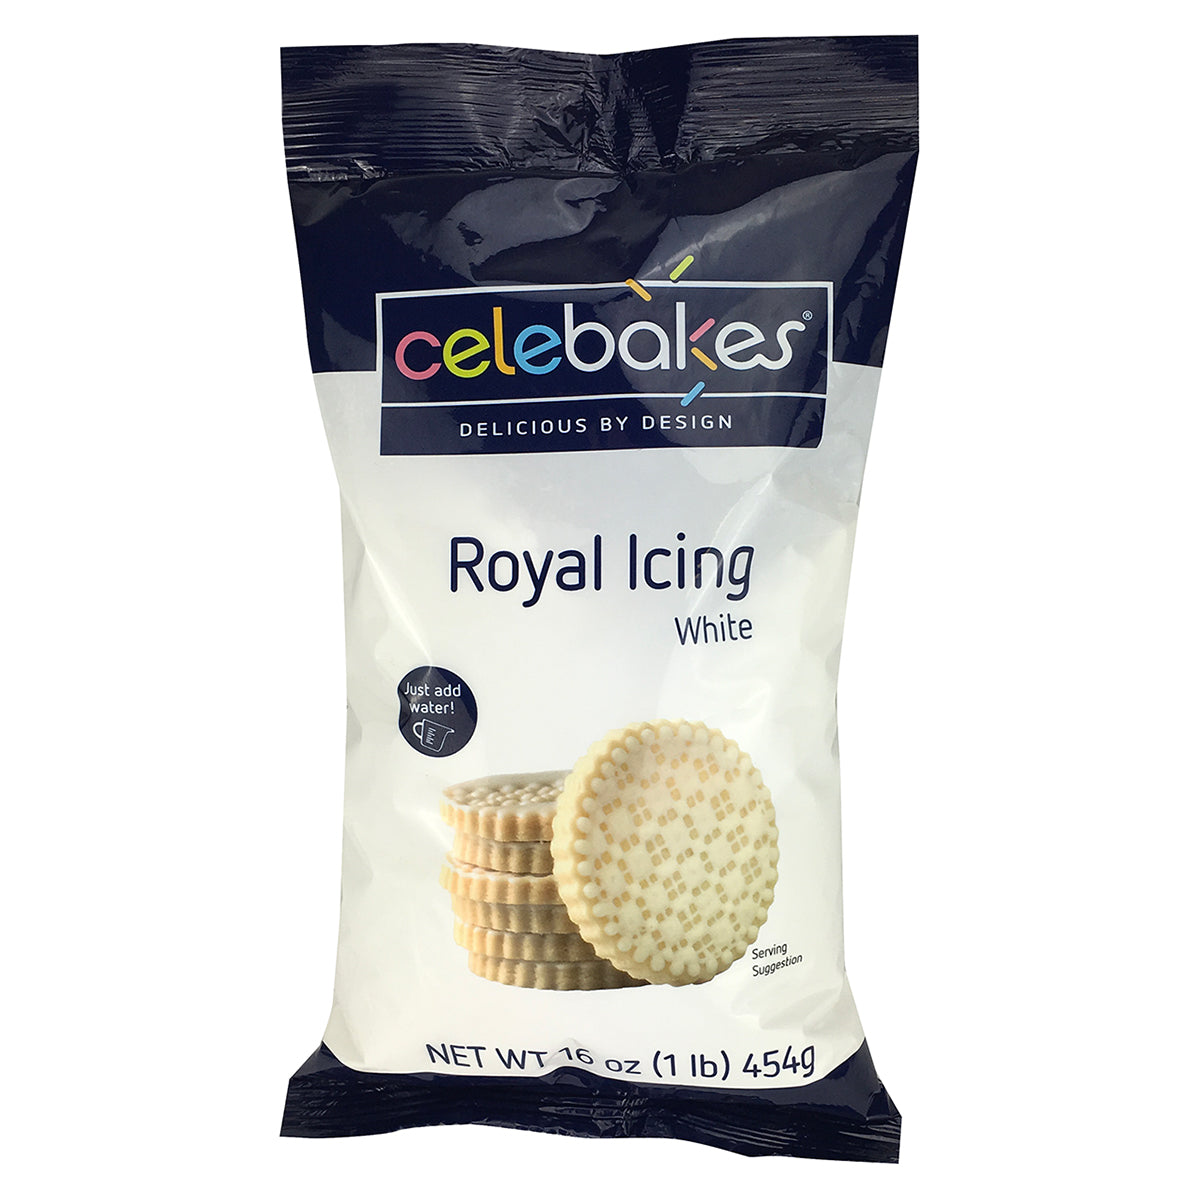 Royal Icing White Mix 1 Pound Bag CK Products Icing - Bake Supply Plus